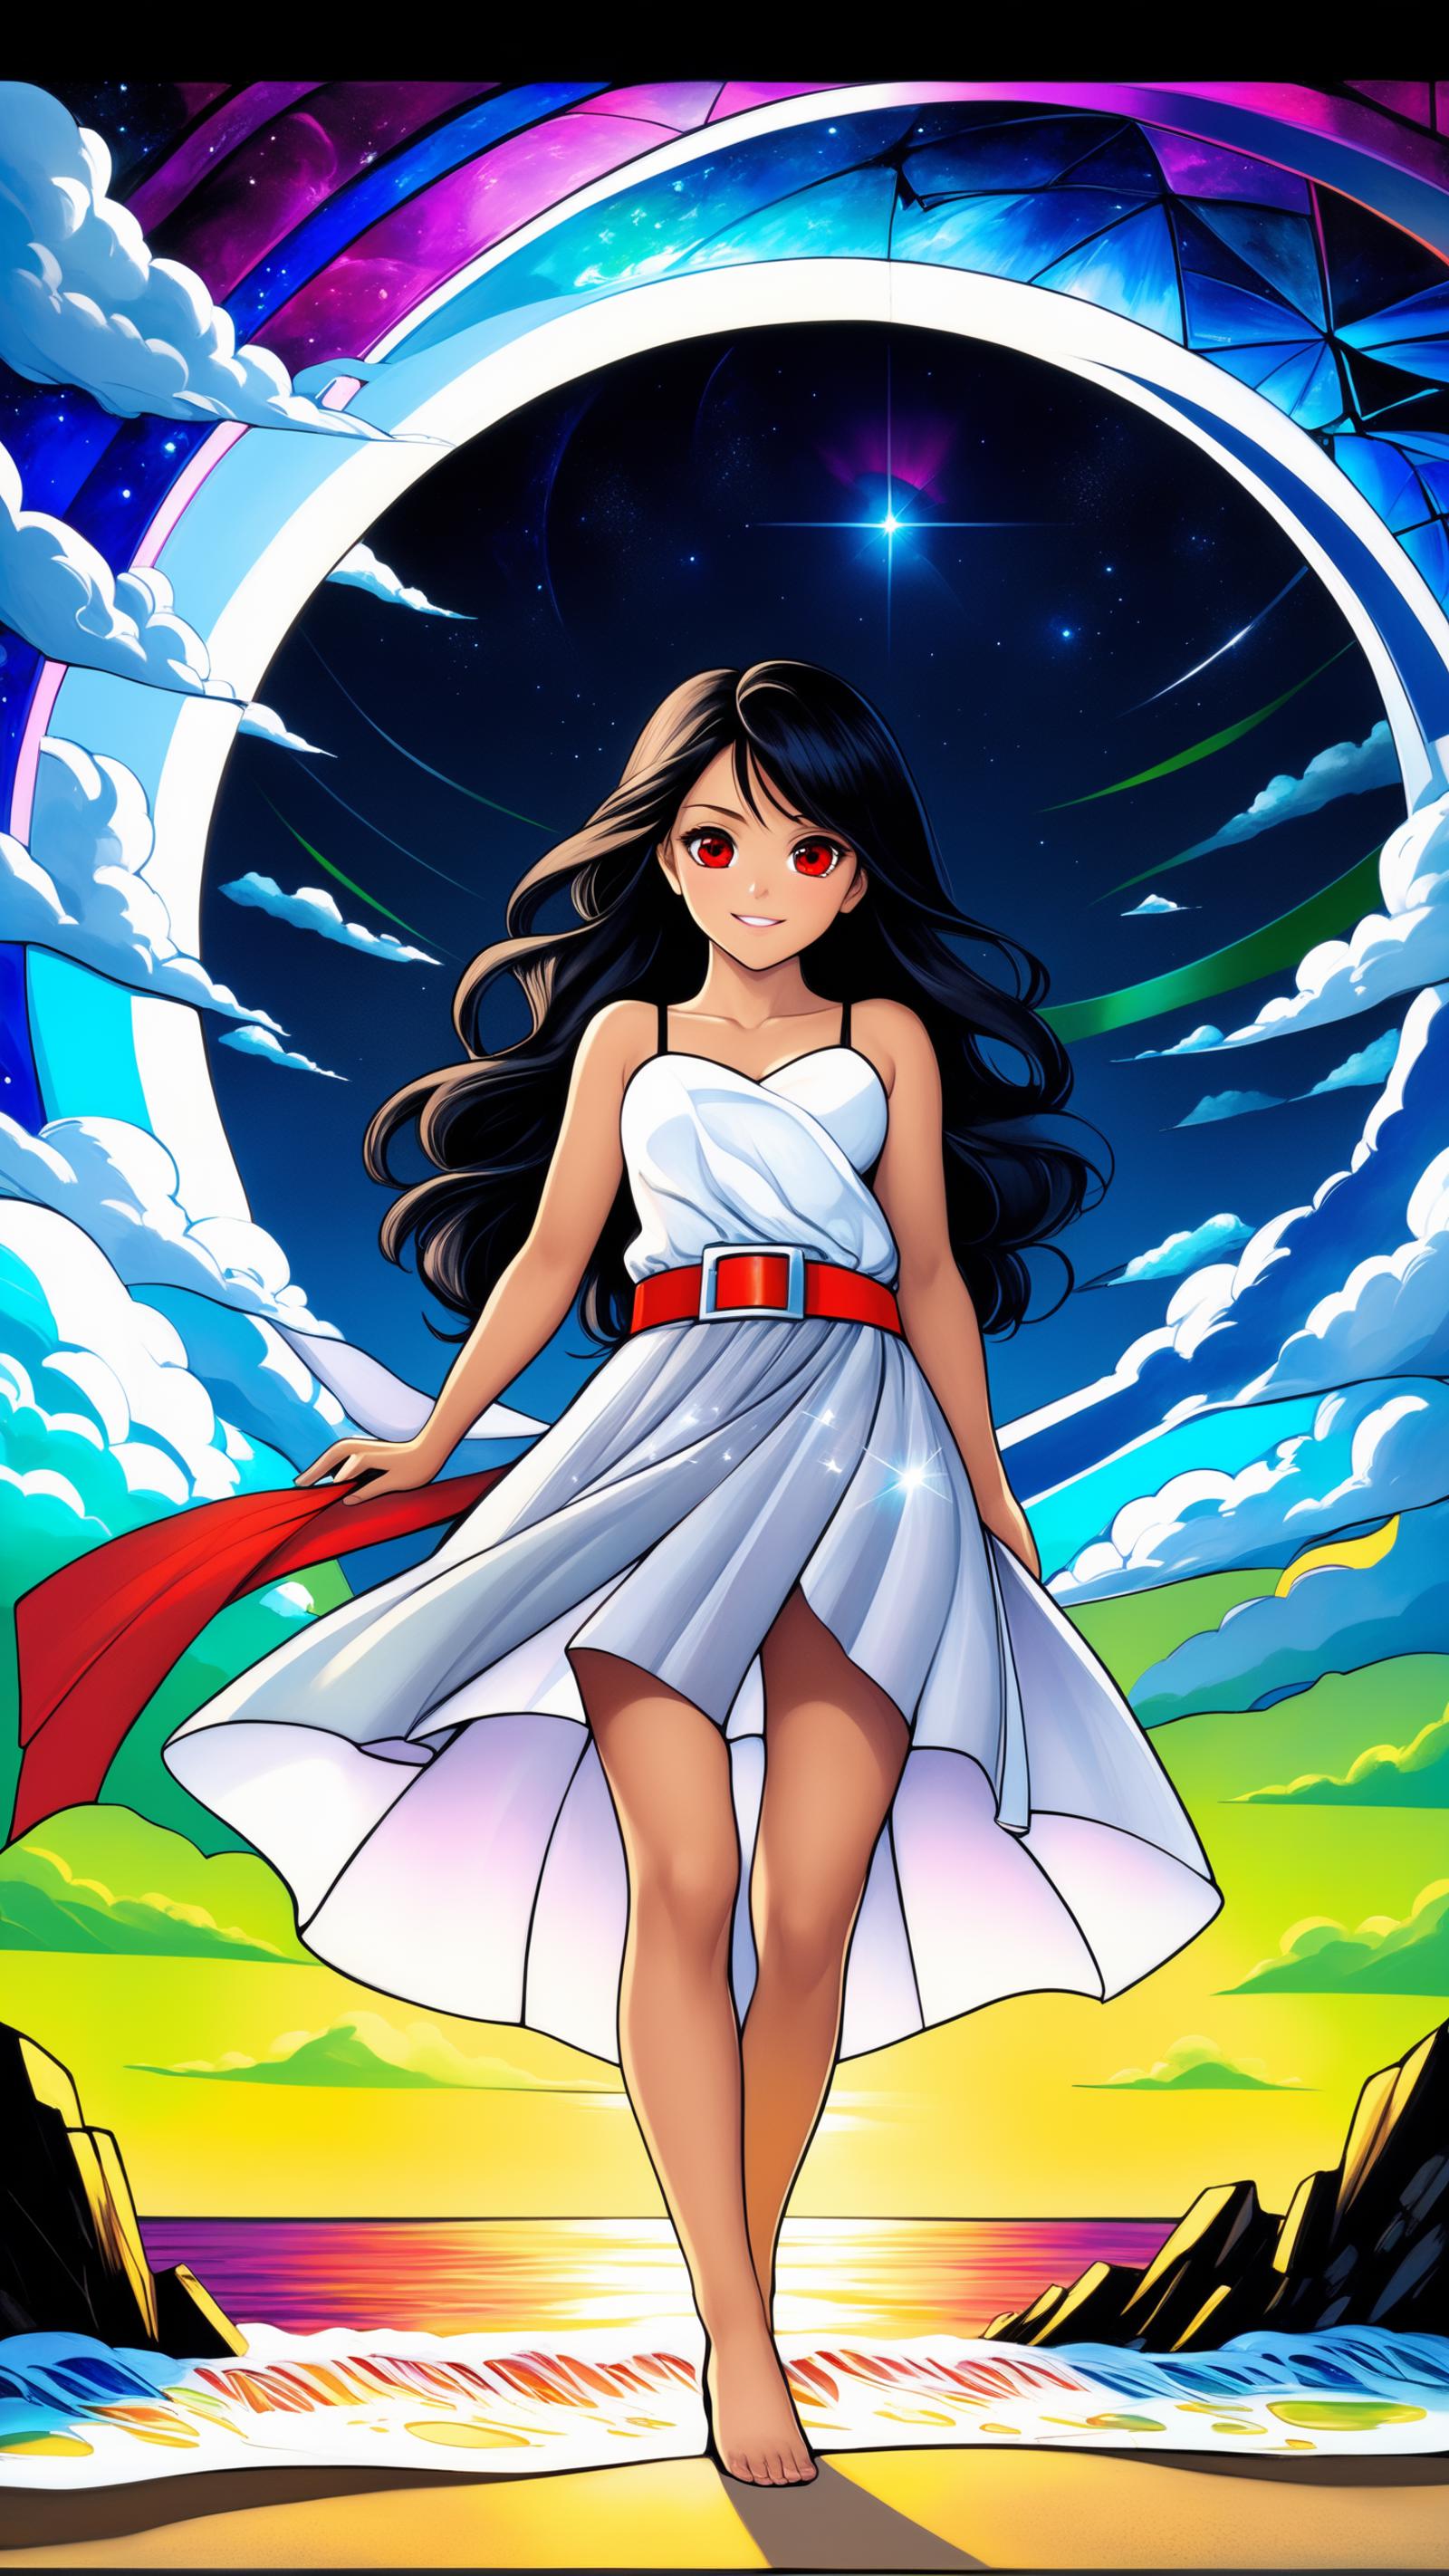 A cartoon illustration of a woman in a white dress with a red belt standing on a cloud.